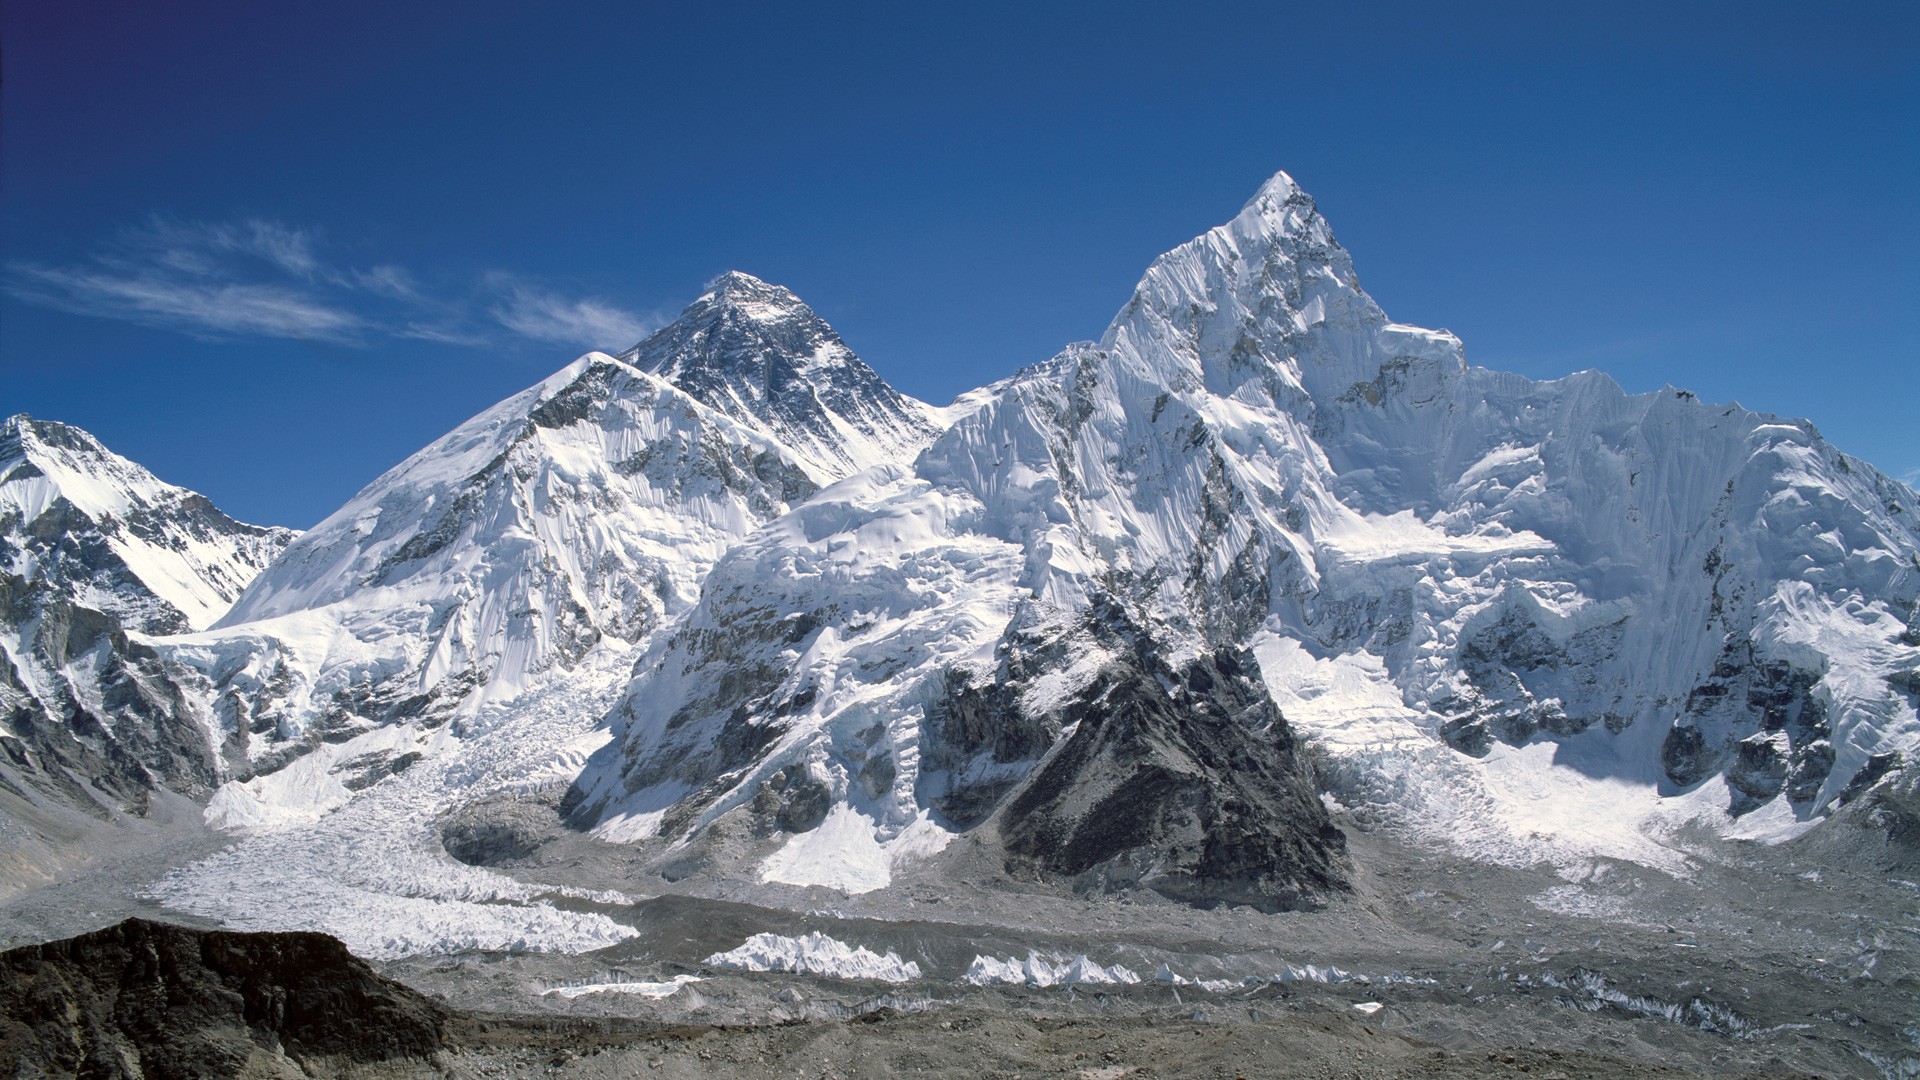 No infections on Everest: Tourism Ministry